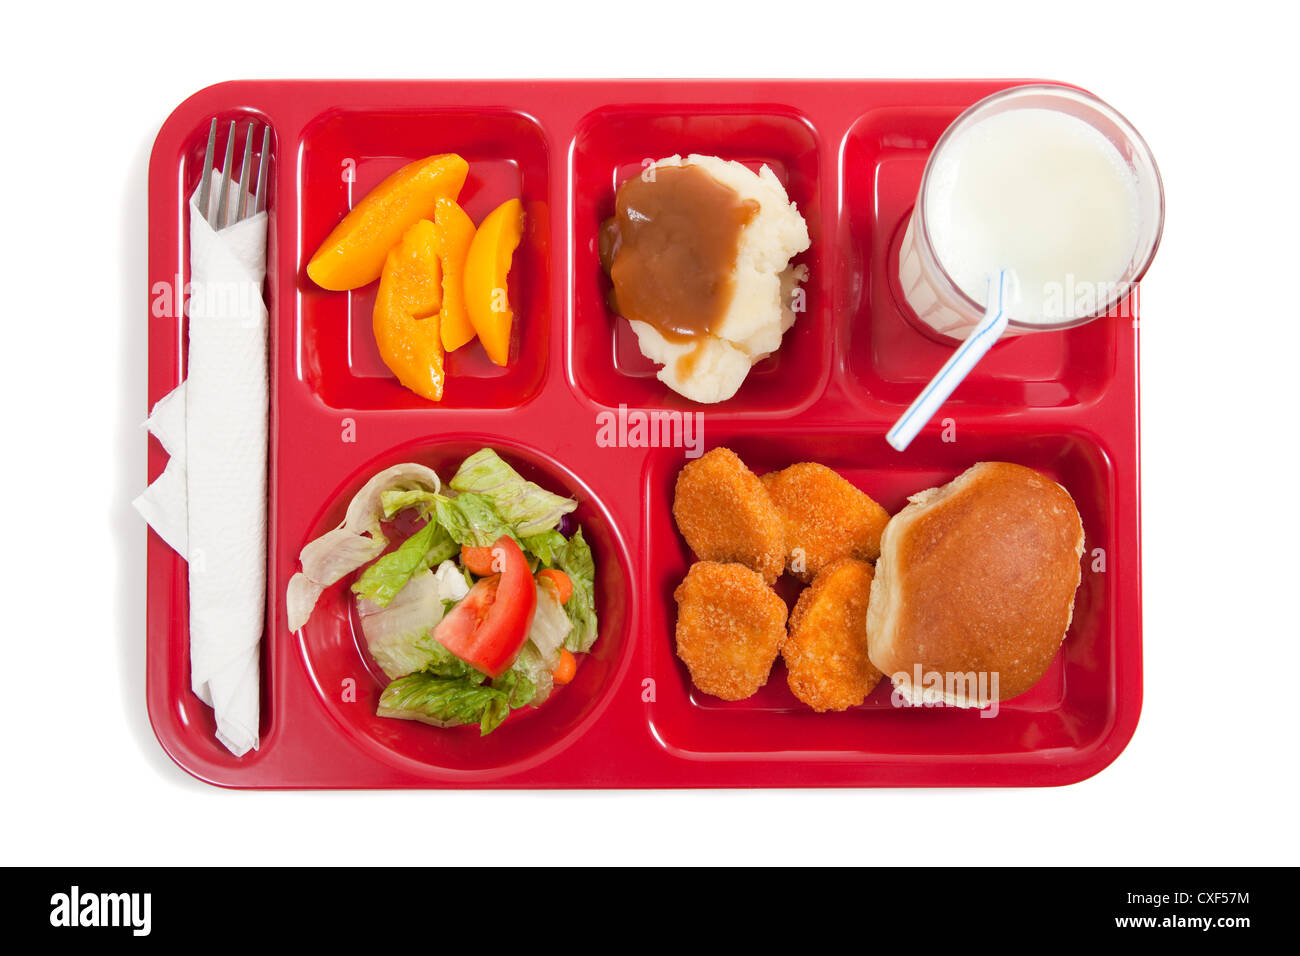 School lunch on a red tray Stock Photo